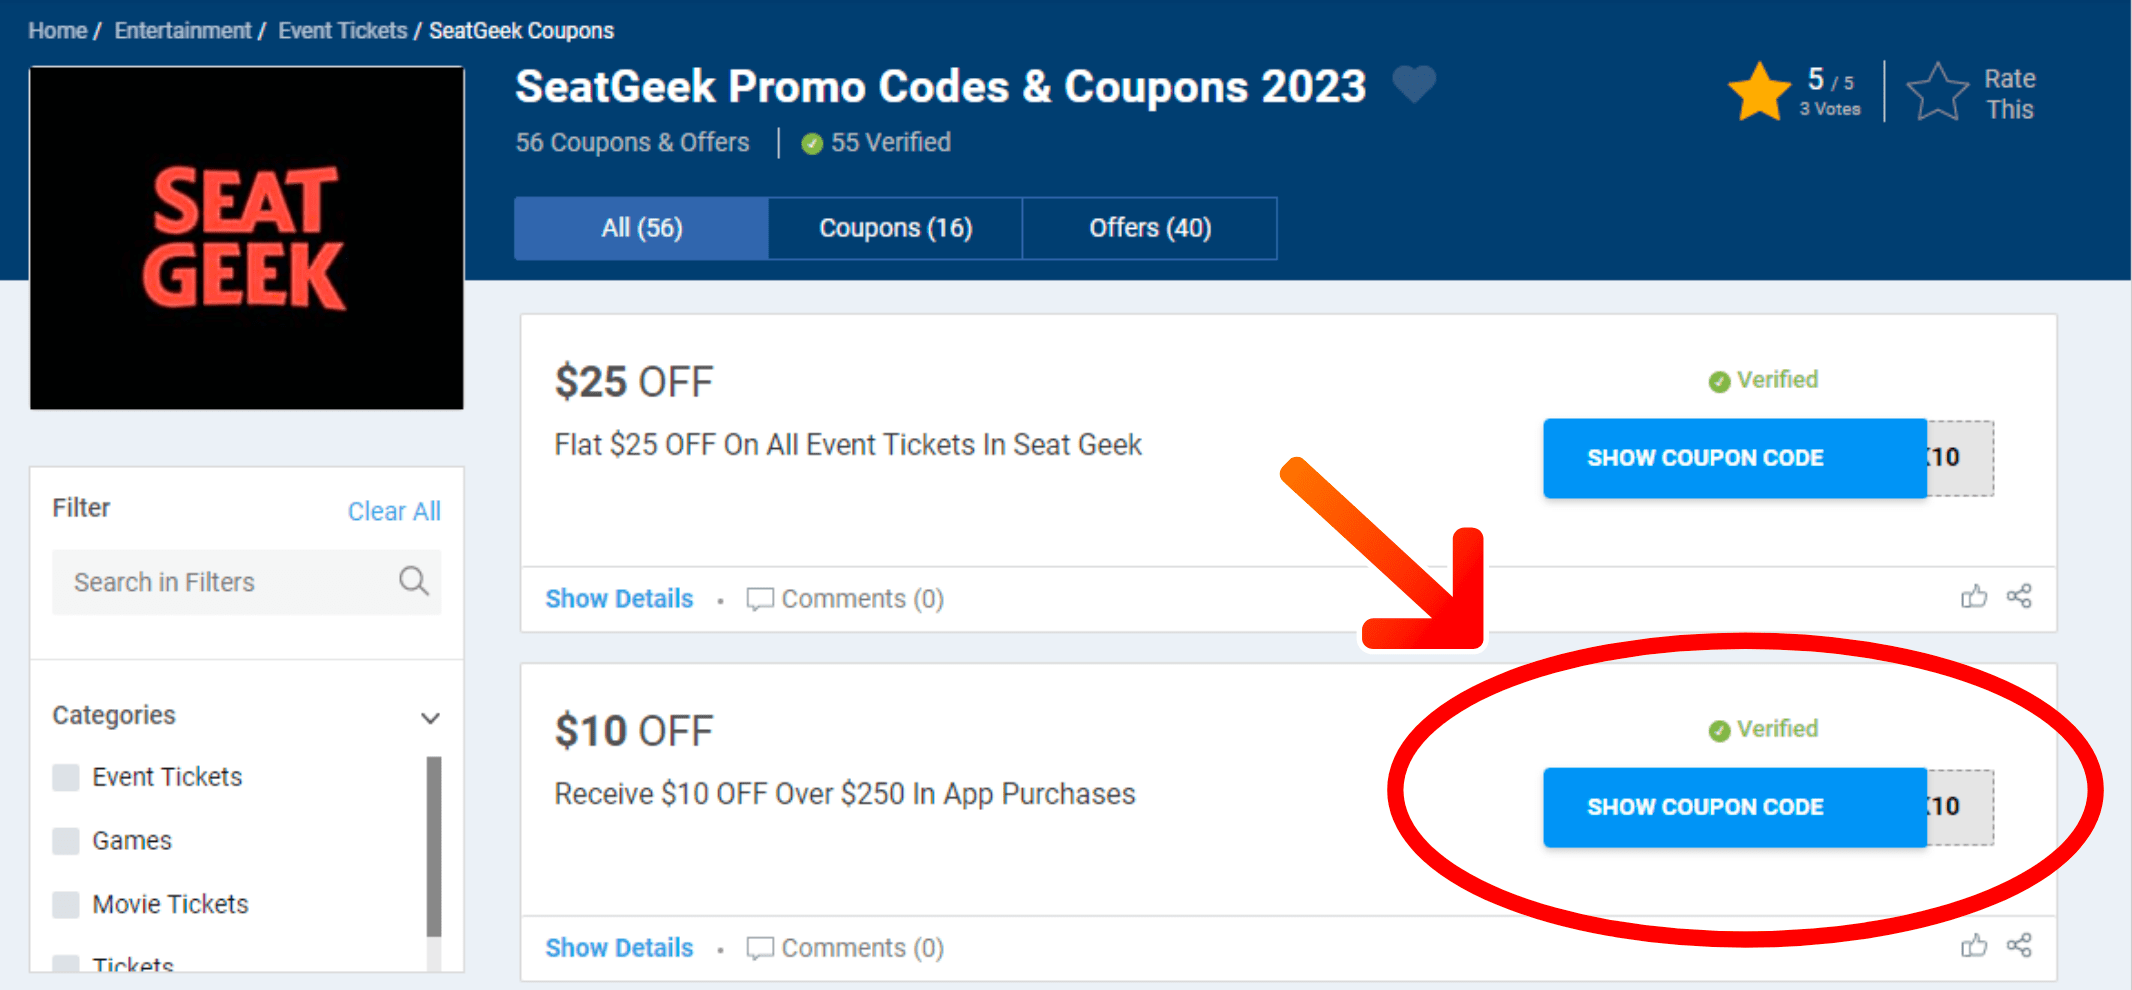 SeatGeek Promo Codes, Coupons & Deals - wide 3